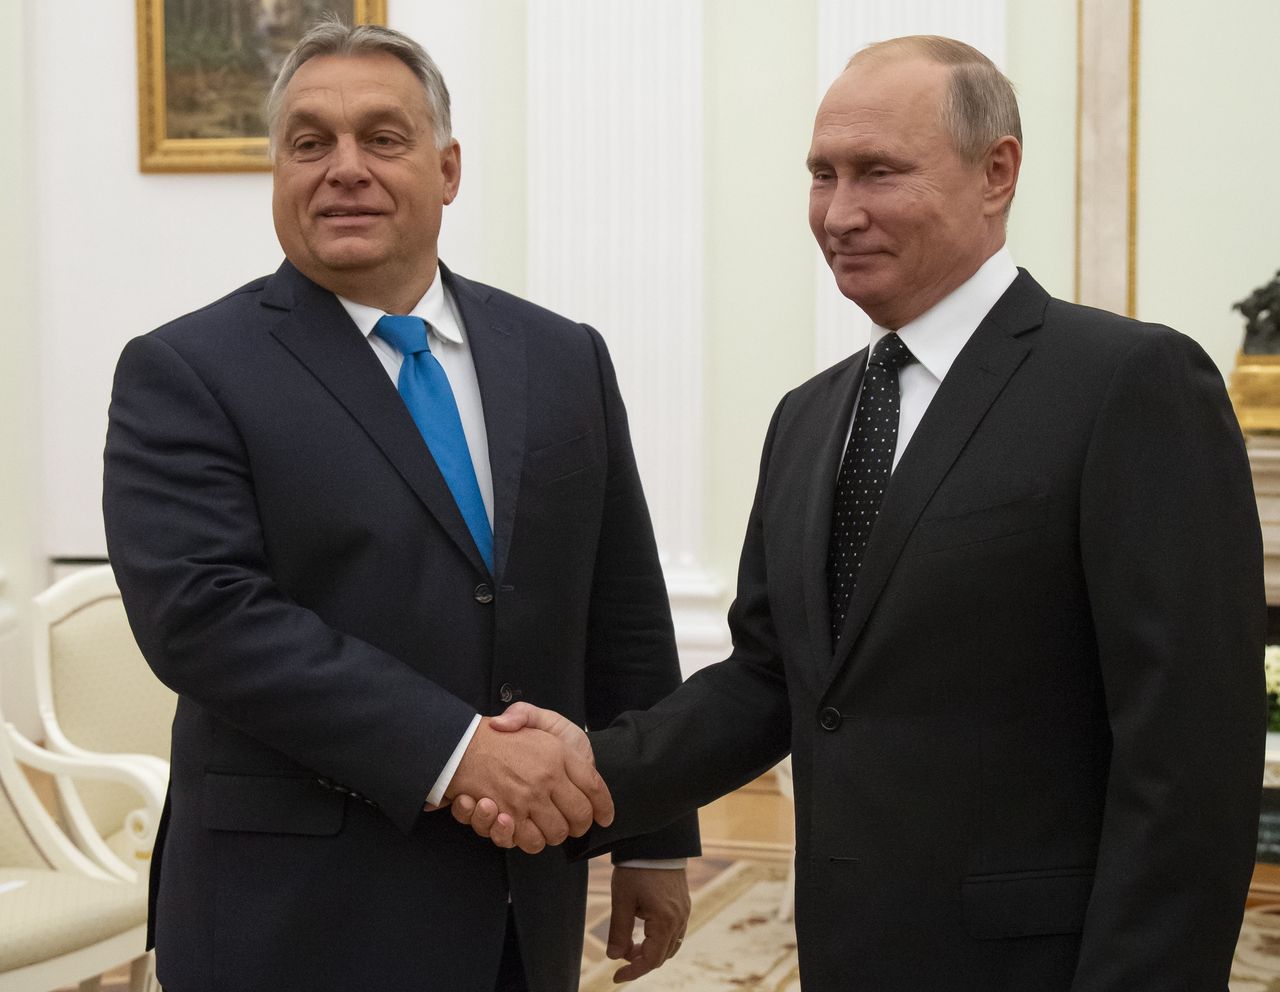 Is Orbán attempting to neutralize Ukraine? He might be attempting to block assistance for Kyiv